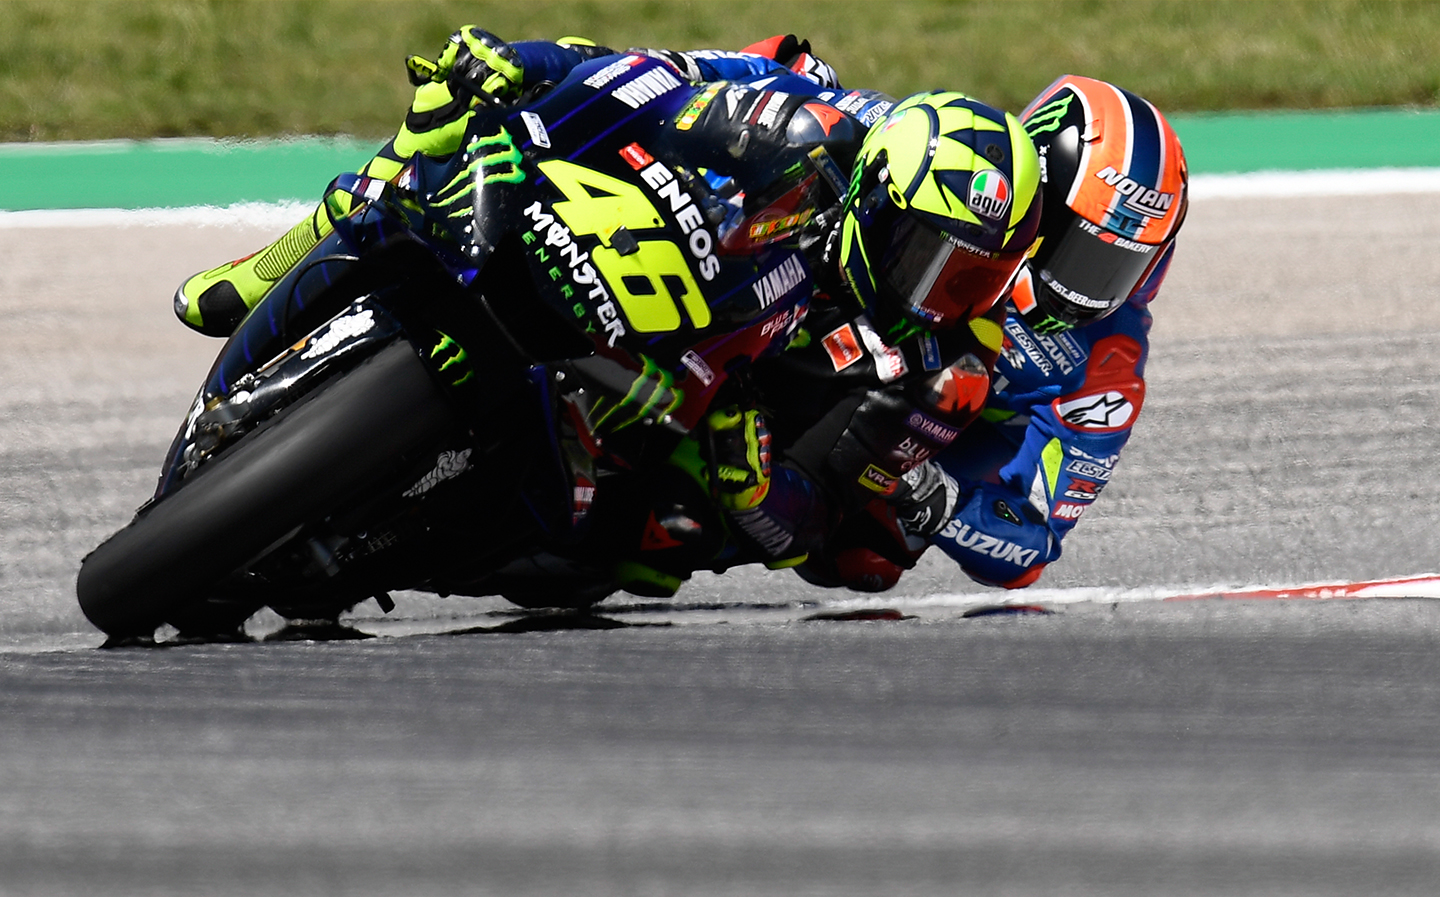 Get 15% off tickets for the 2019 GoPro MotoGP British Grand Prix at Silverstone